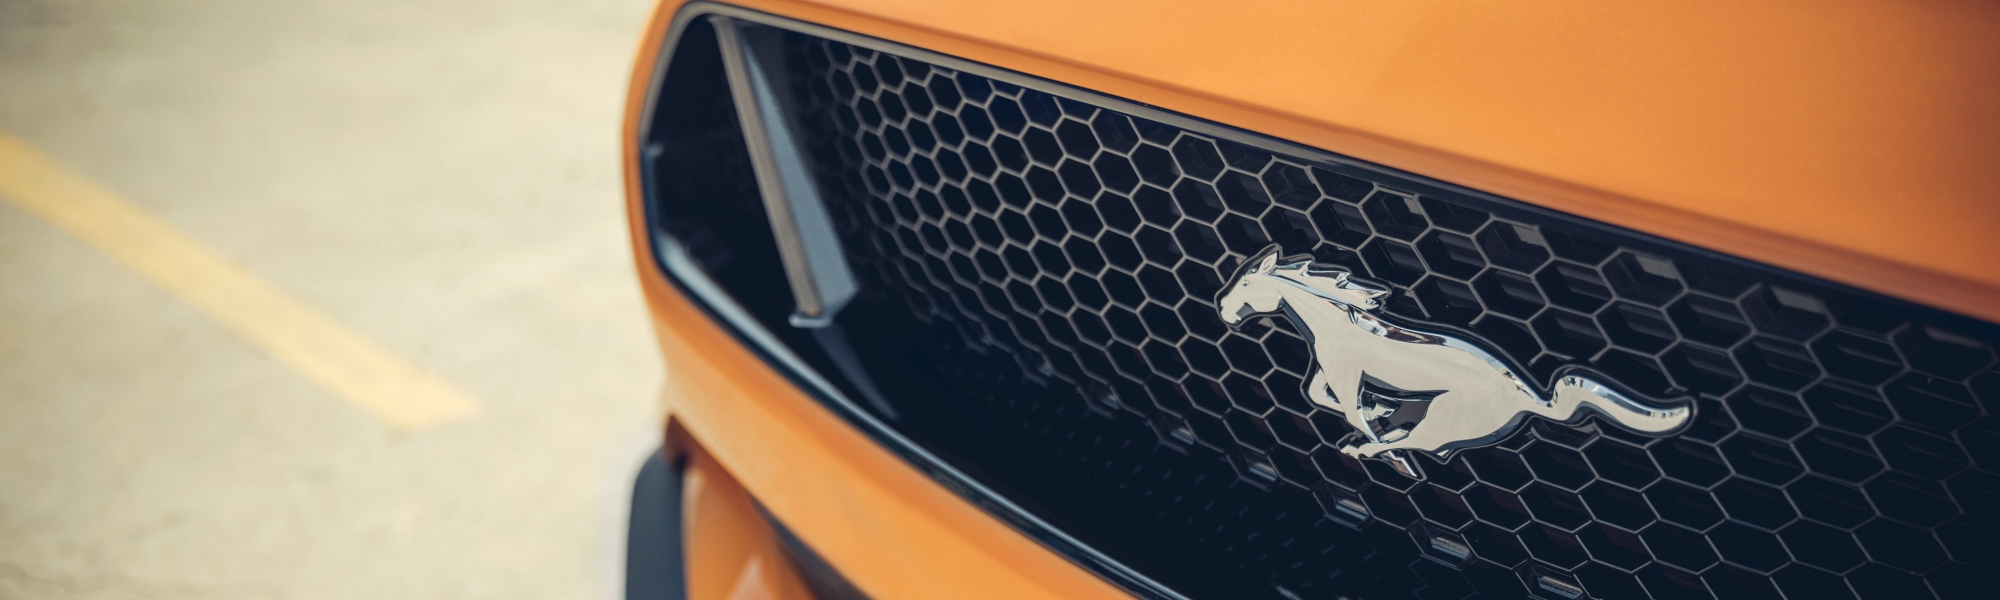 Ford Mustang Grill | Boca Raton, FL